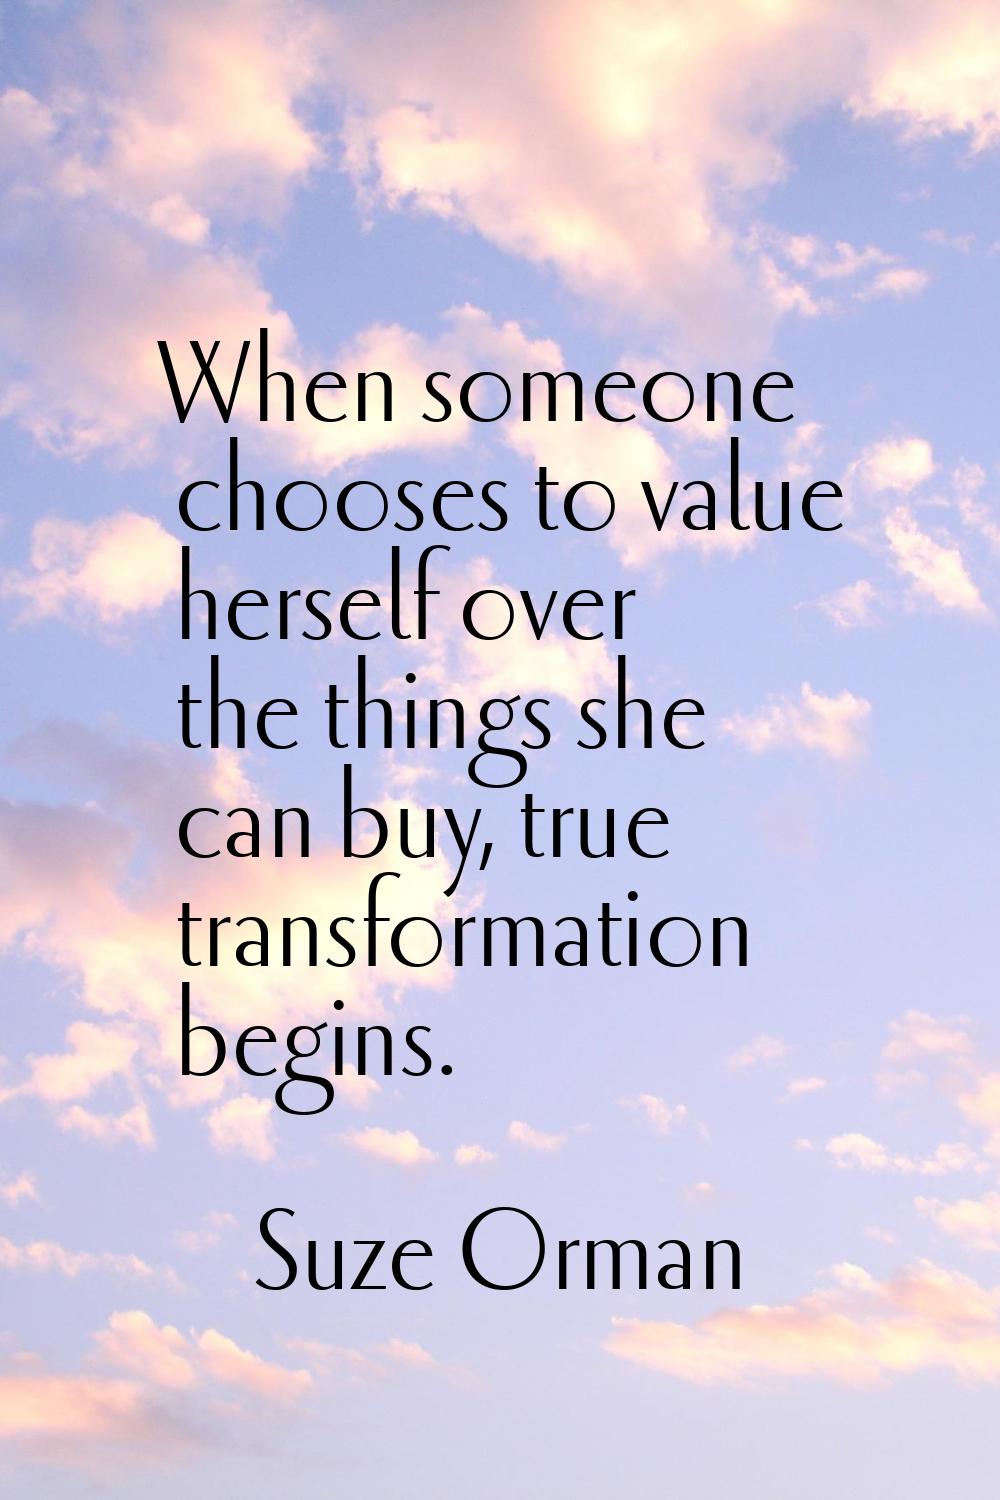 When someone chooses to value herself over the things she can buy, true transformation begins.